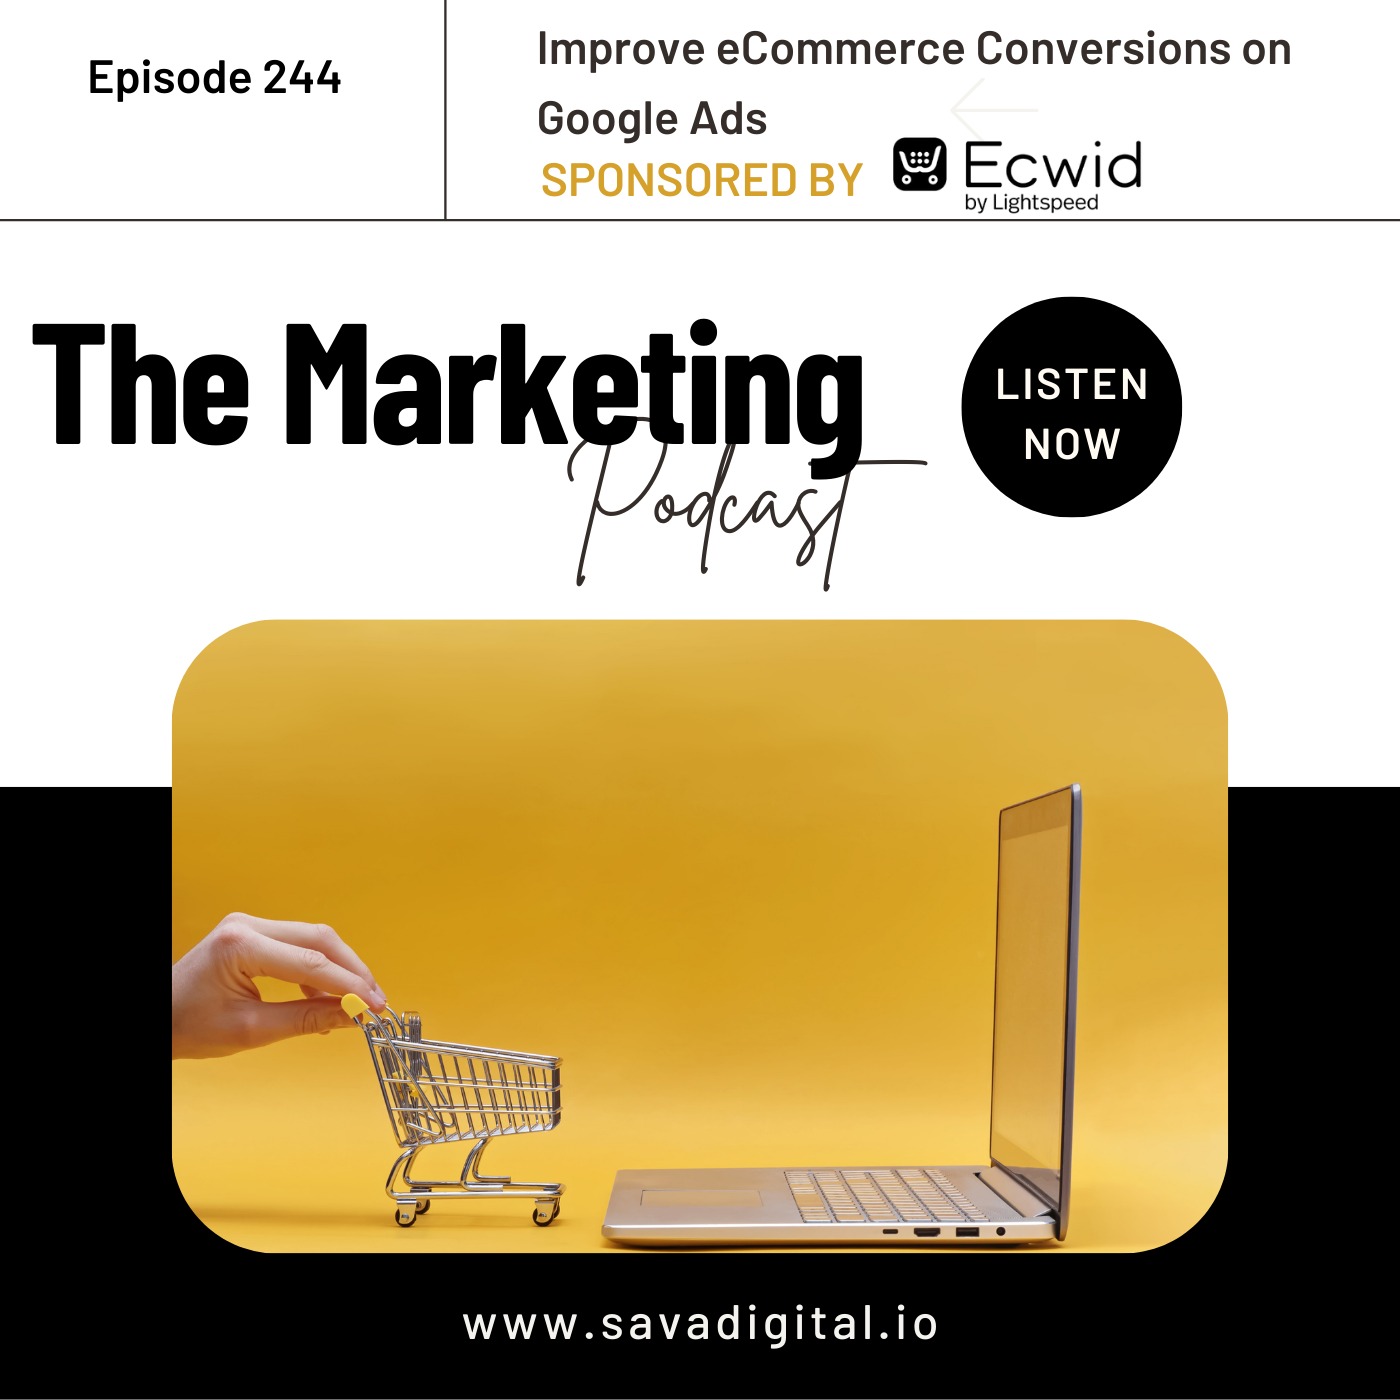 EP 244 : How to improve eCommerce conversions on Google Ads